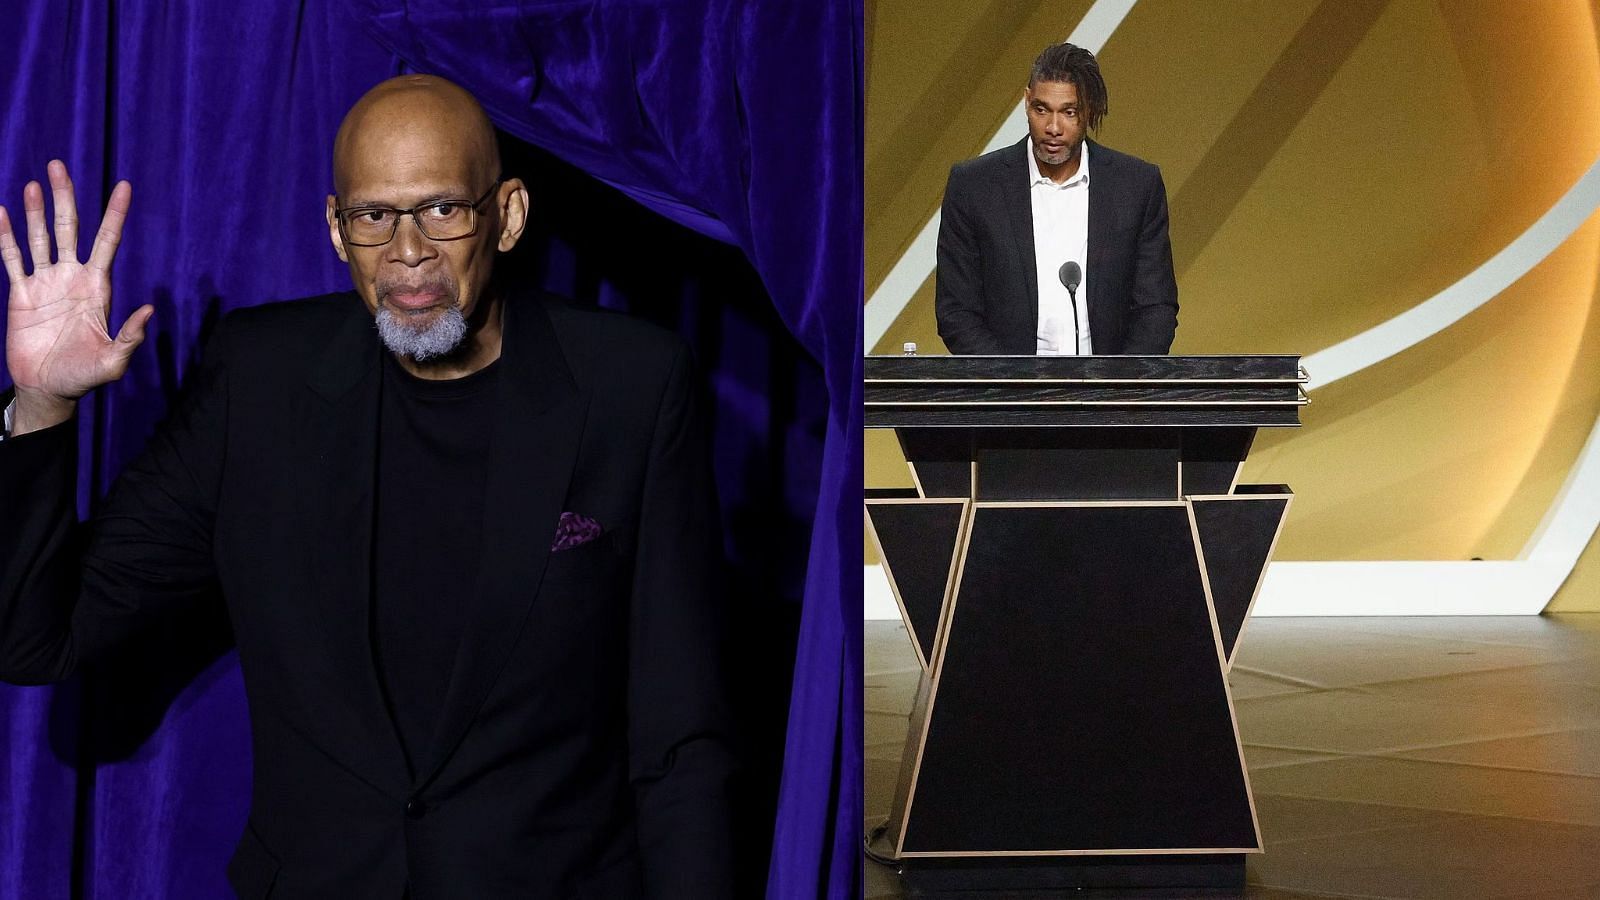 Kareem Abdul-Jabbar (left) and Tim Duncan (right) are two of the greatest college players ever.